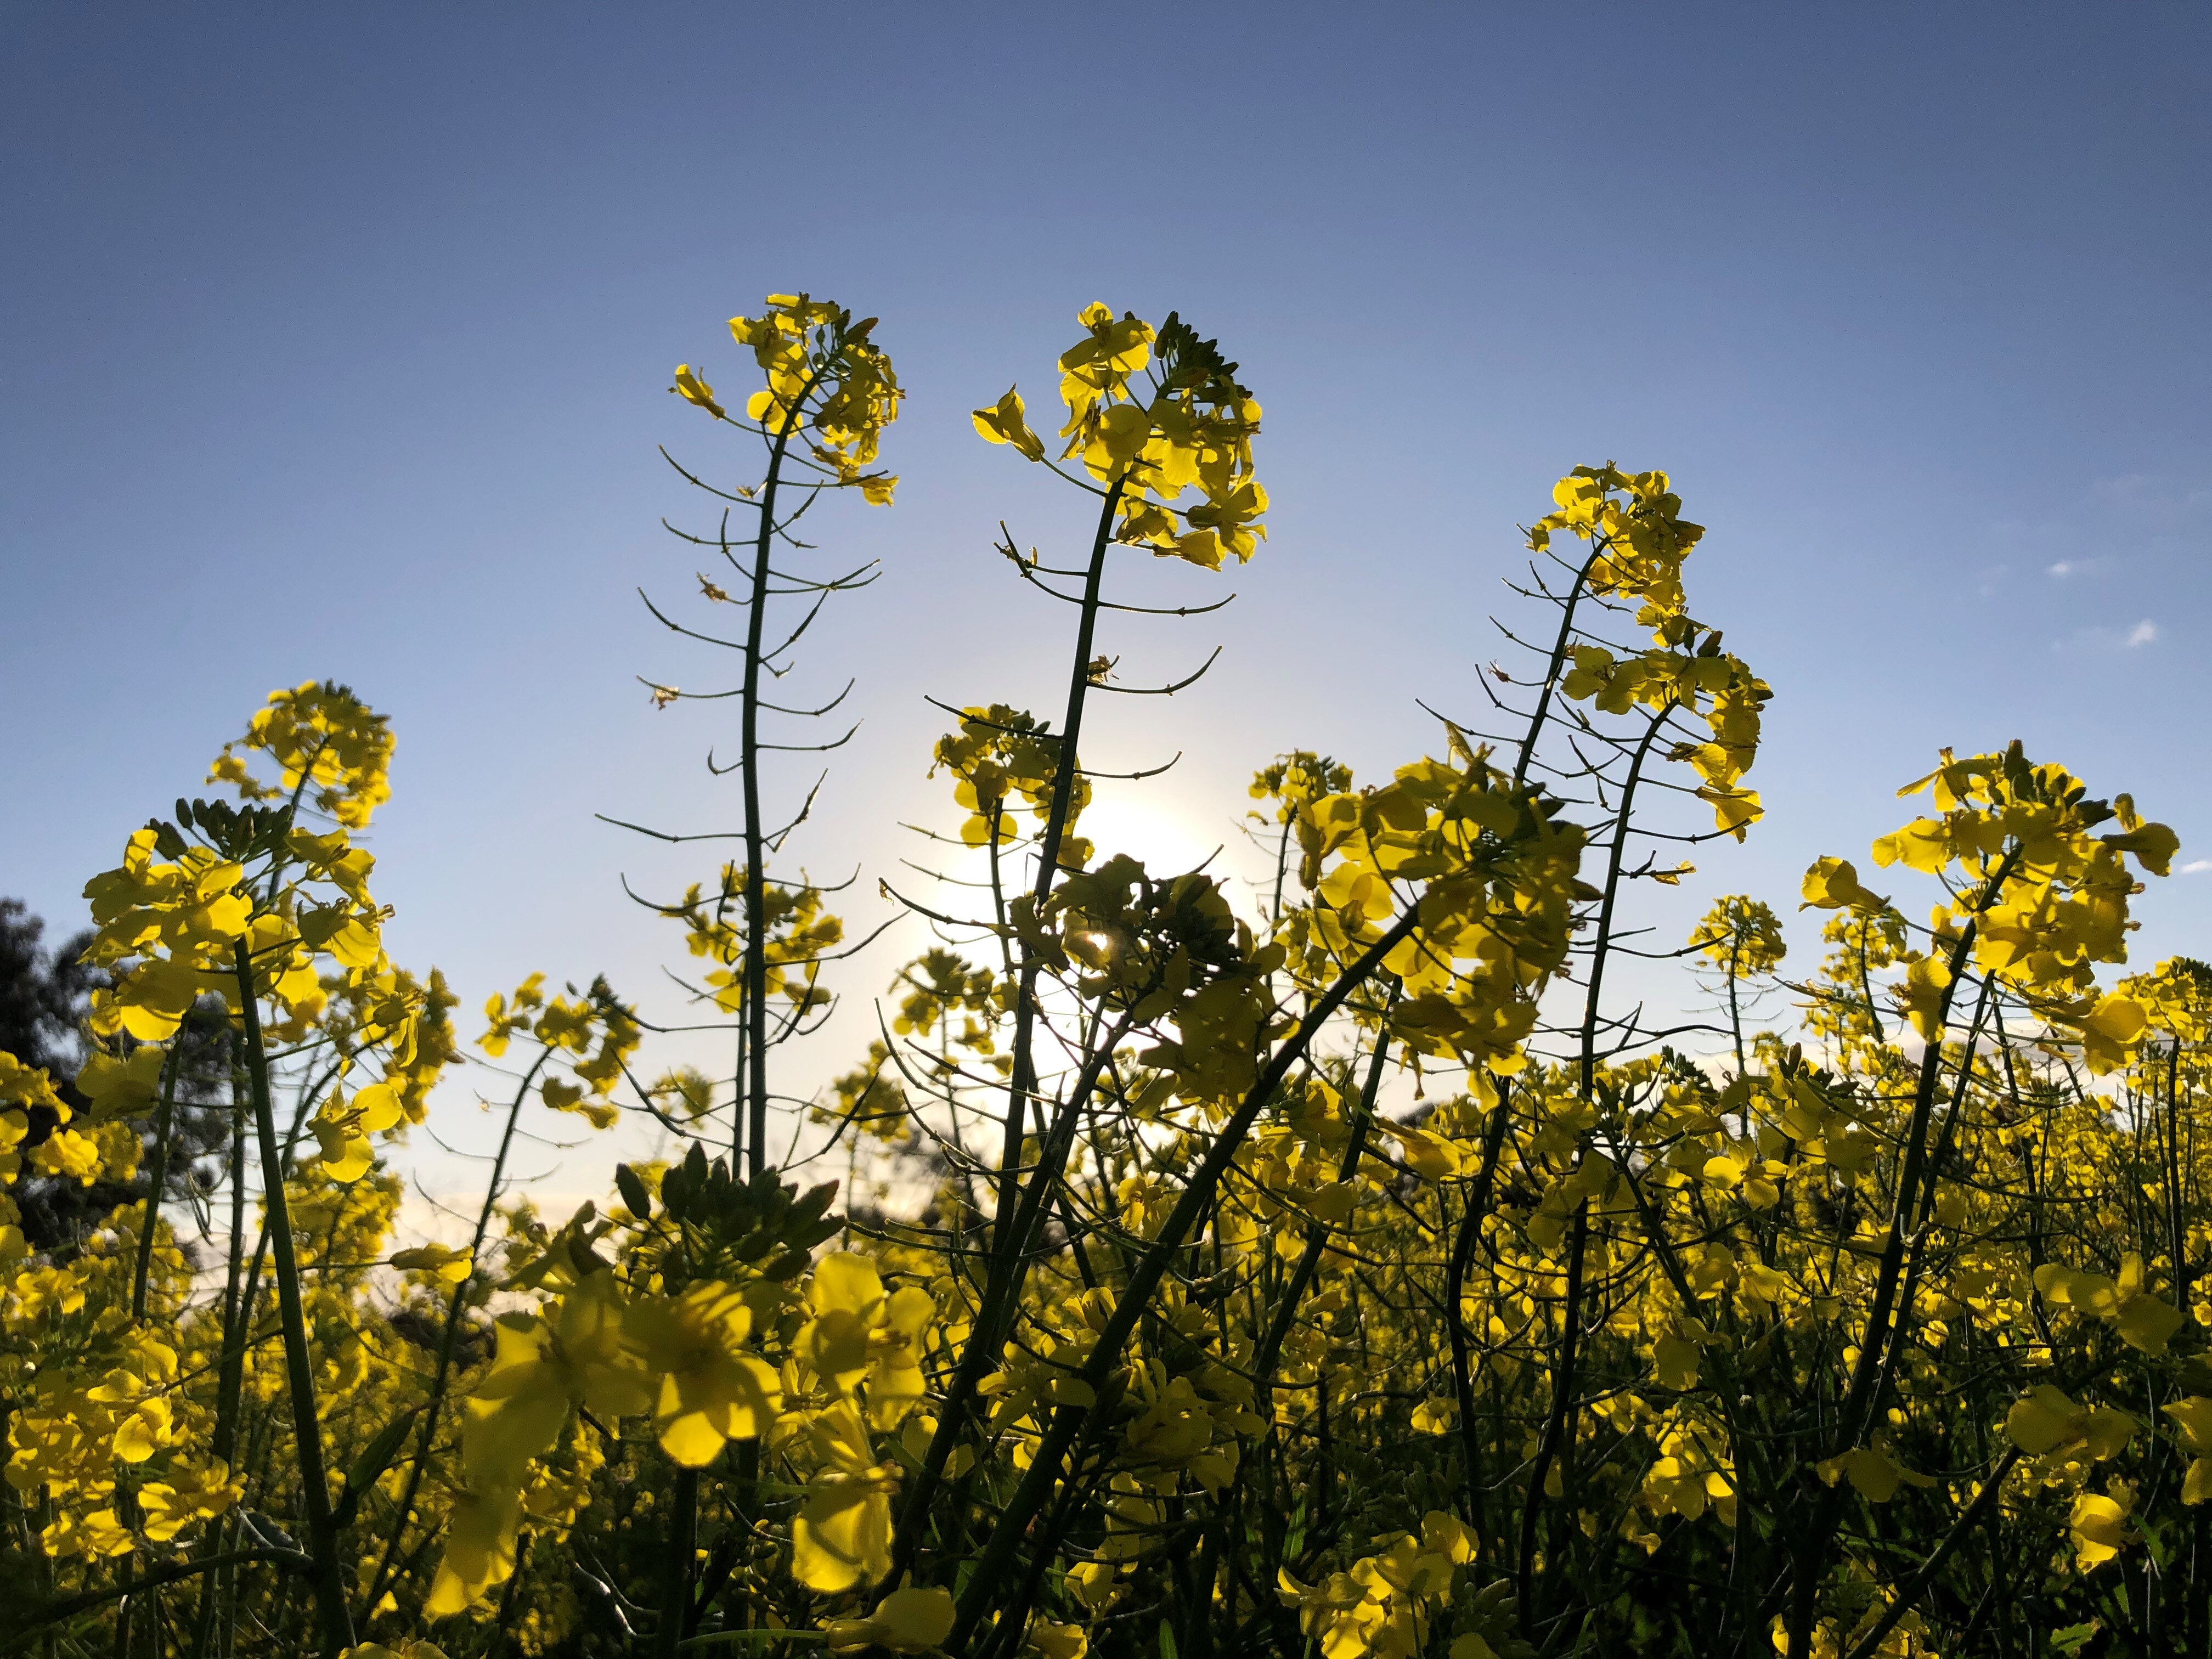 A ground-up shot showing the heads of canola plants backlit by bright sunshine